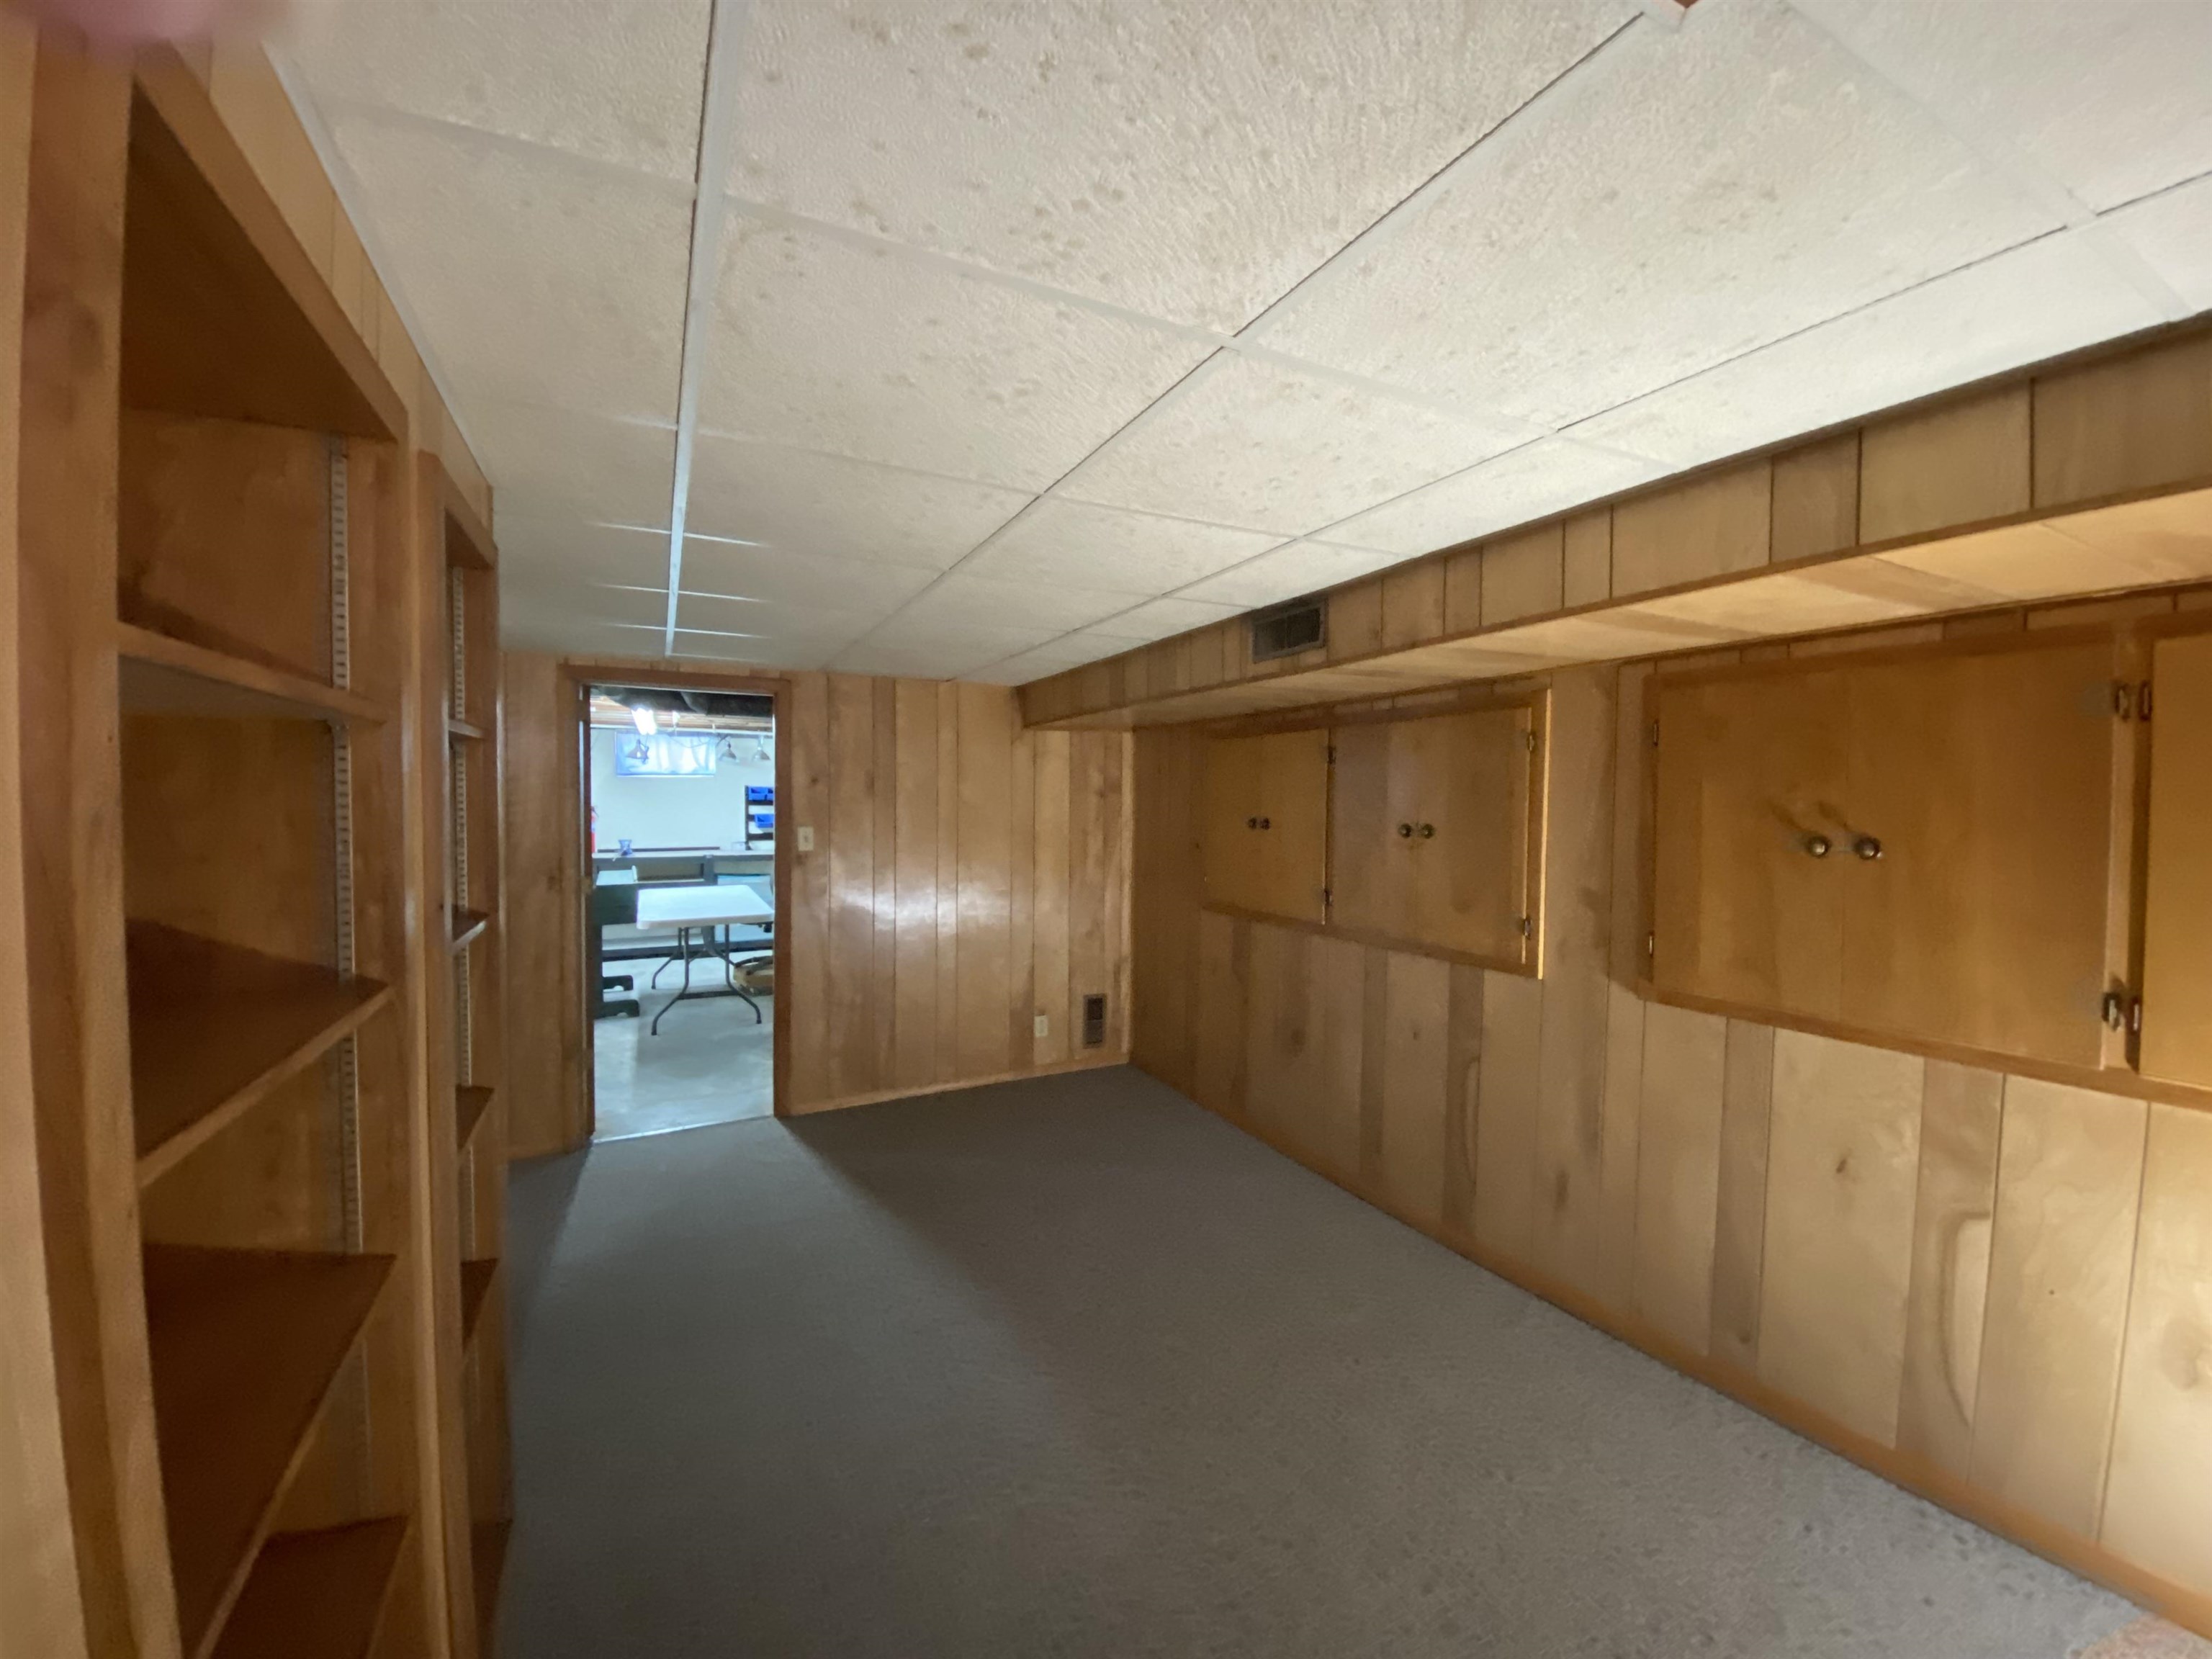 Offers built in shelves and storage into crawl space